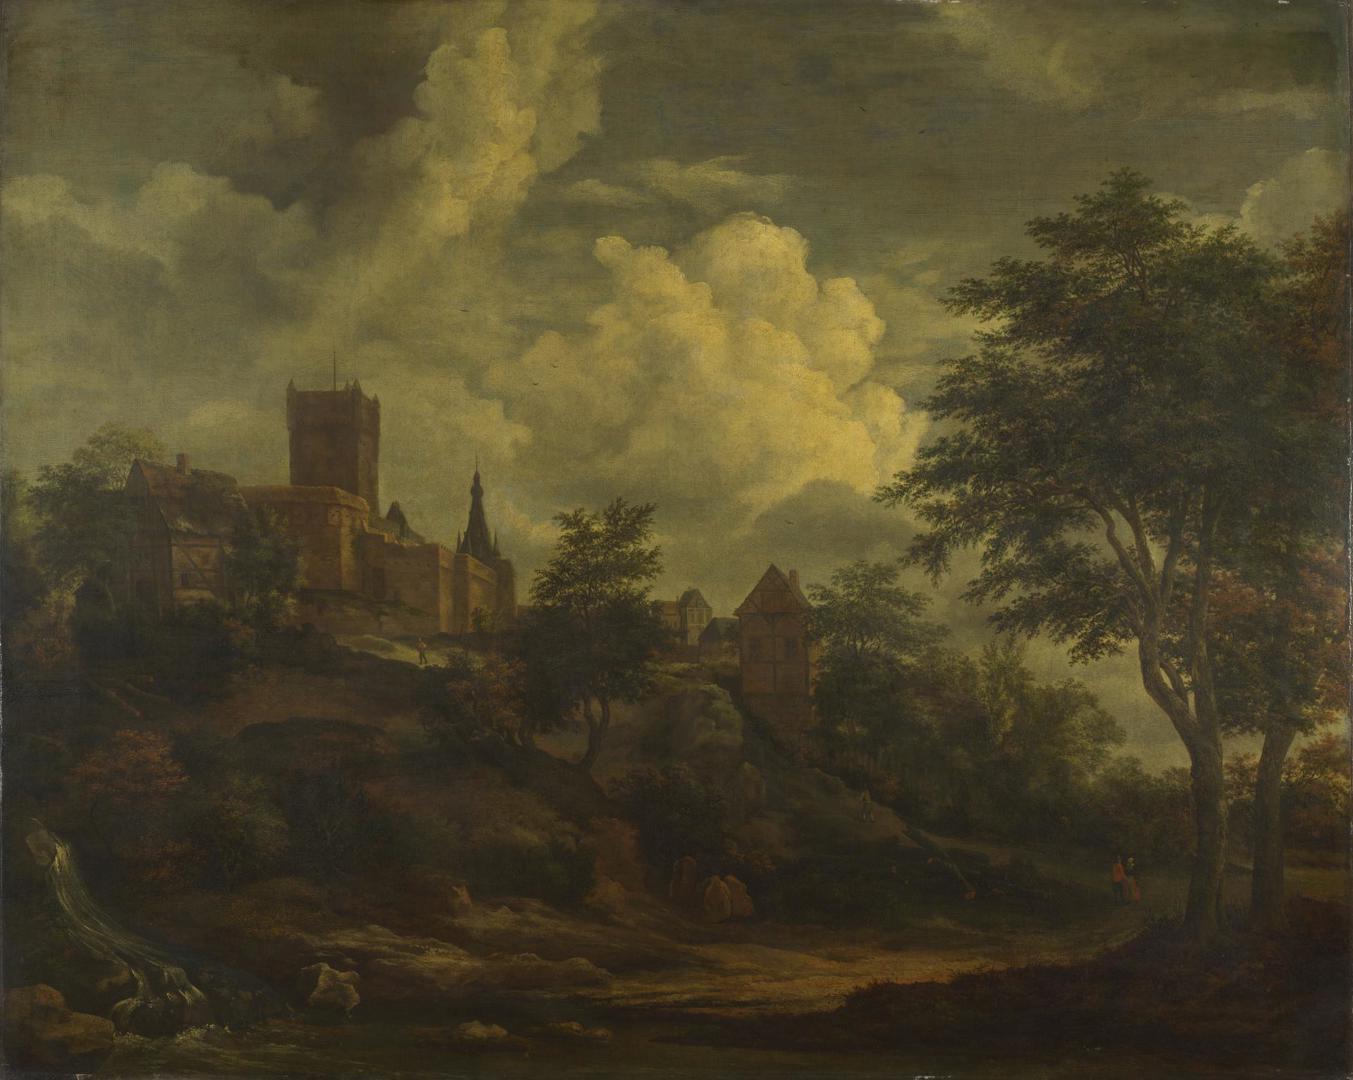 A Castle on a Hill by a River by Imitator of Jacob van Ruisdael